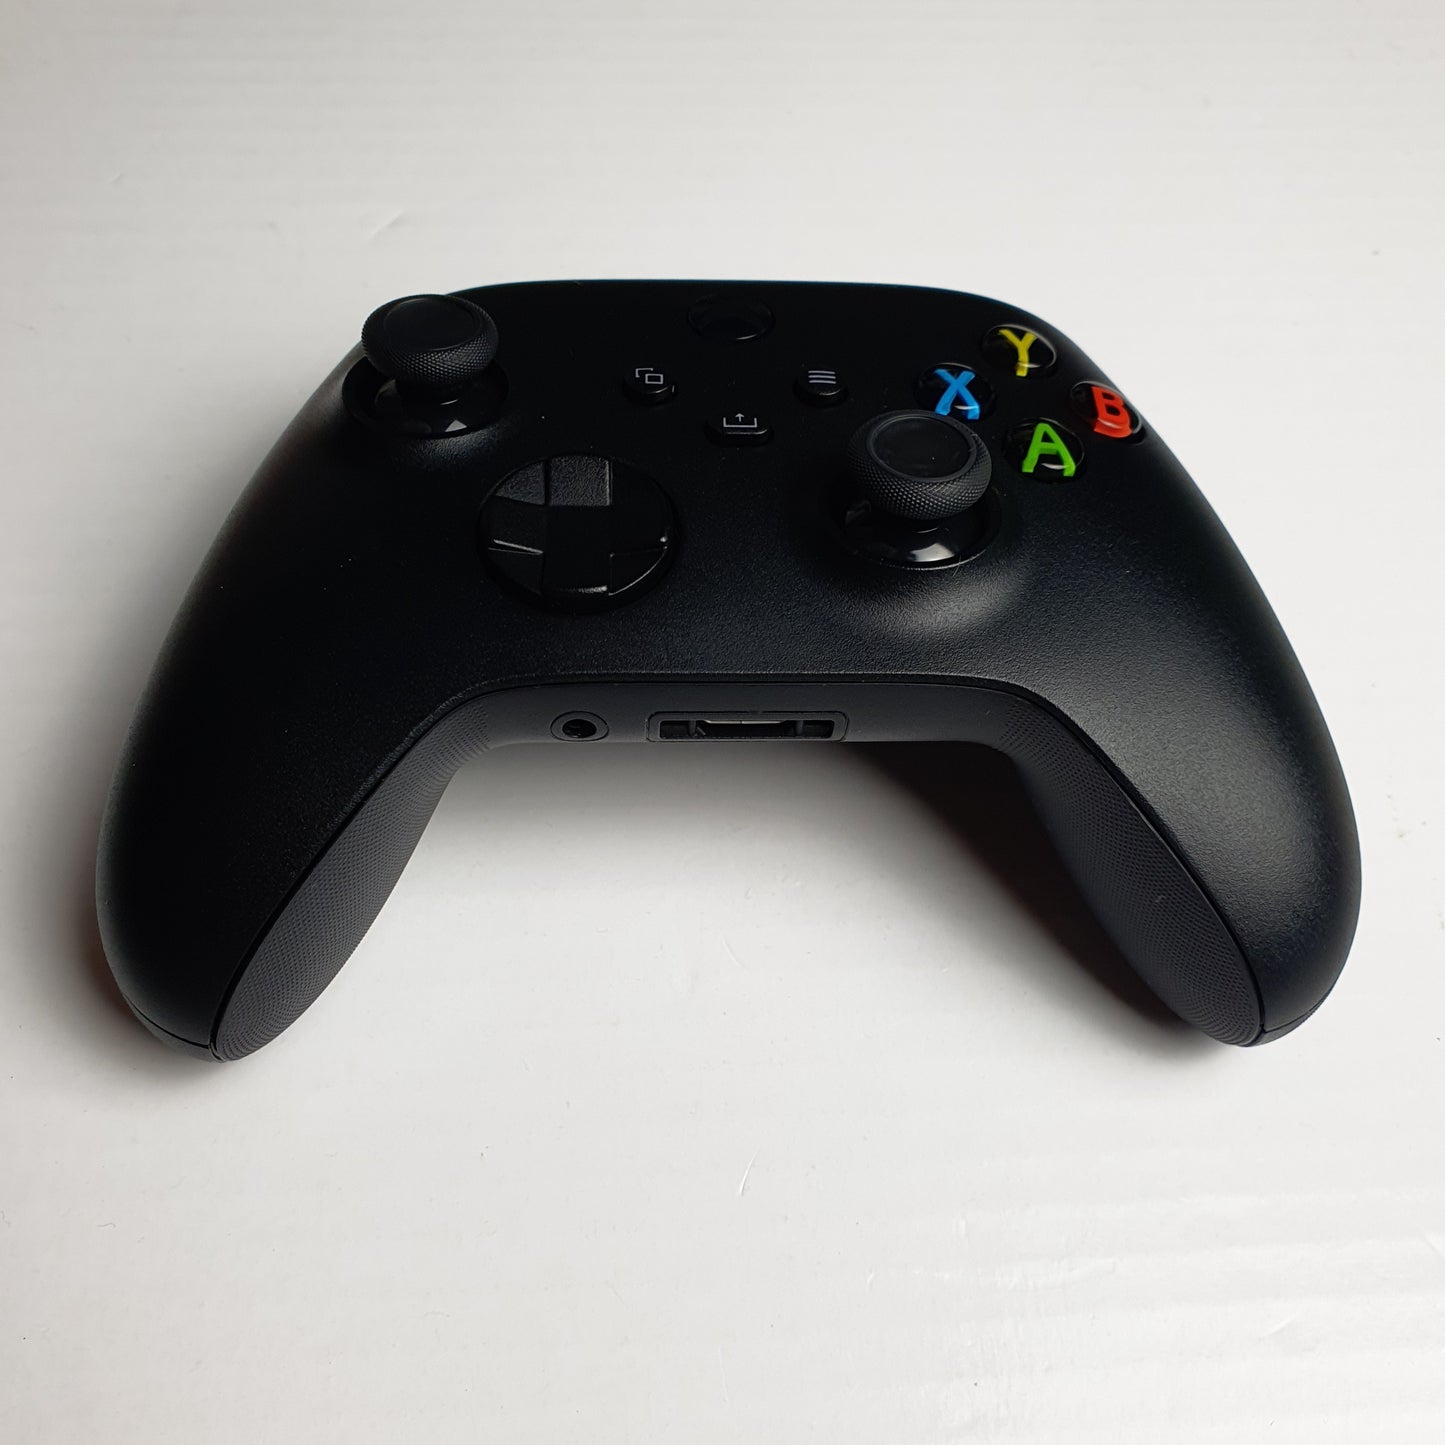 Official Microsoft Xbox Wireless Bluetooth 'Carbon Black' Controller 1914